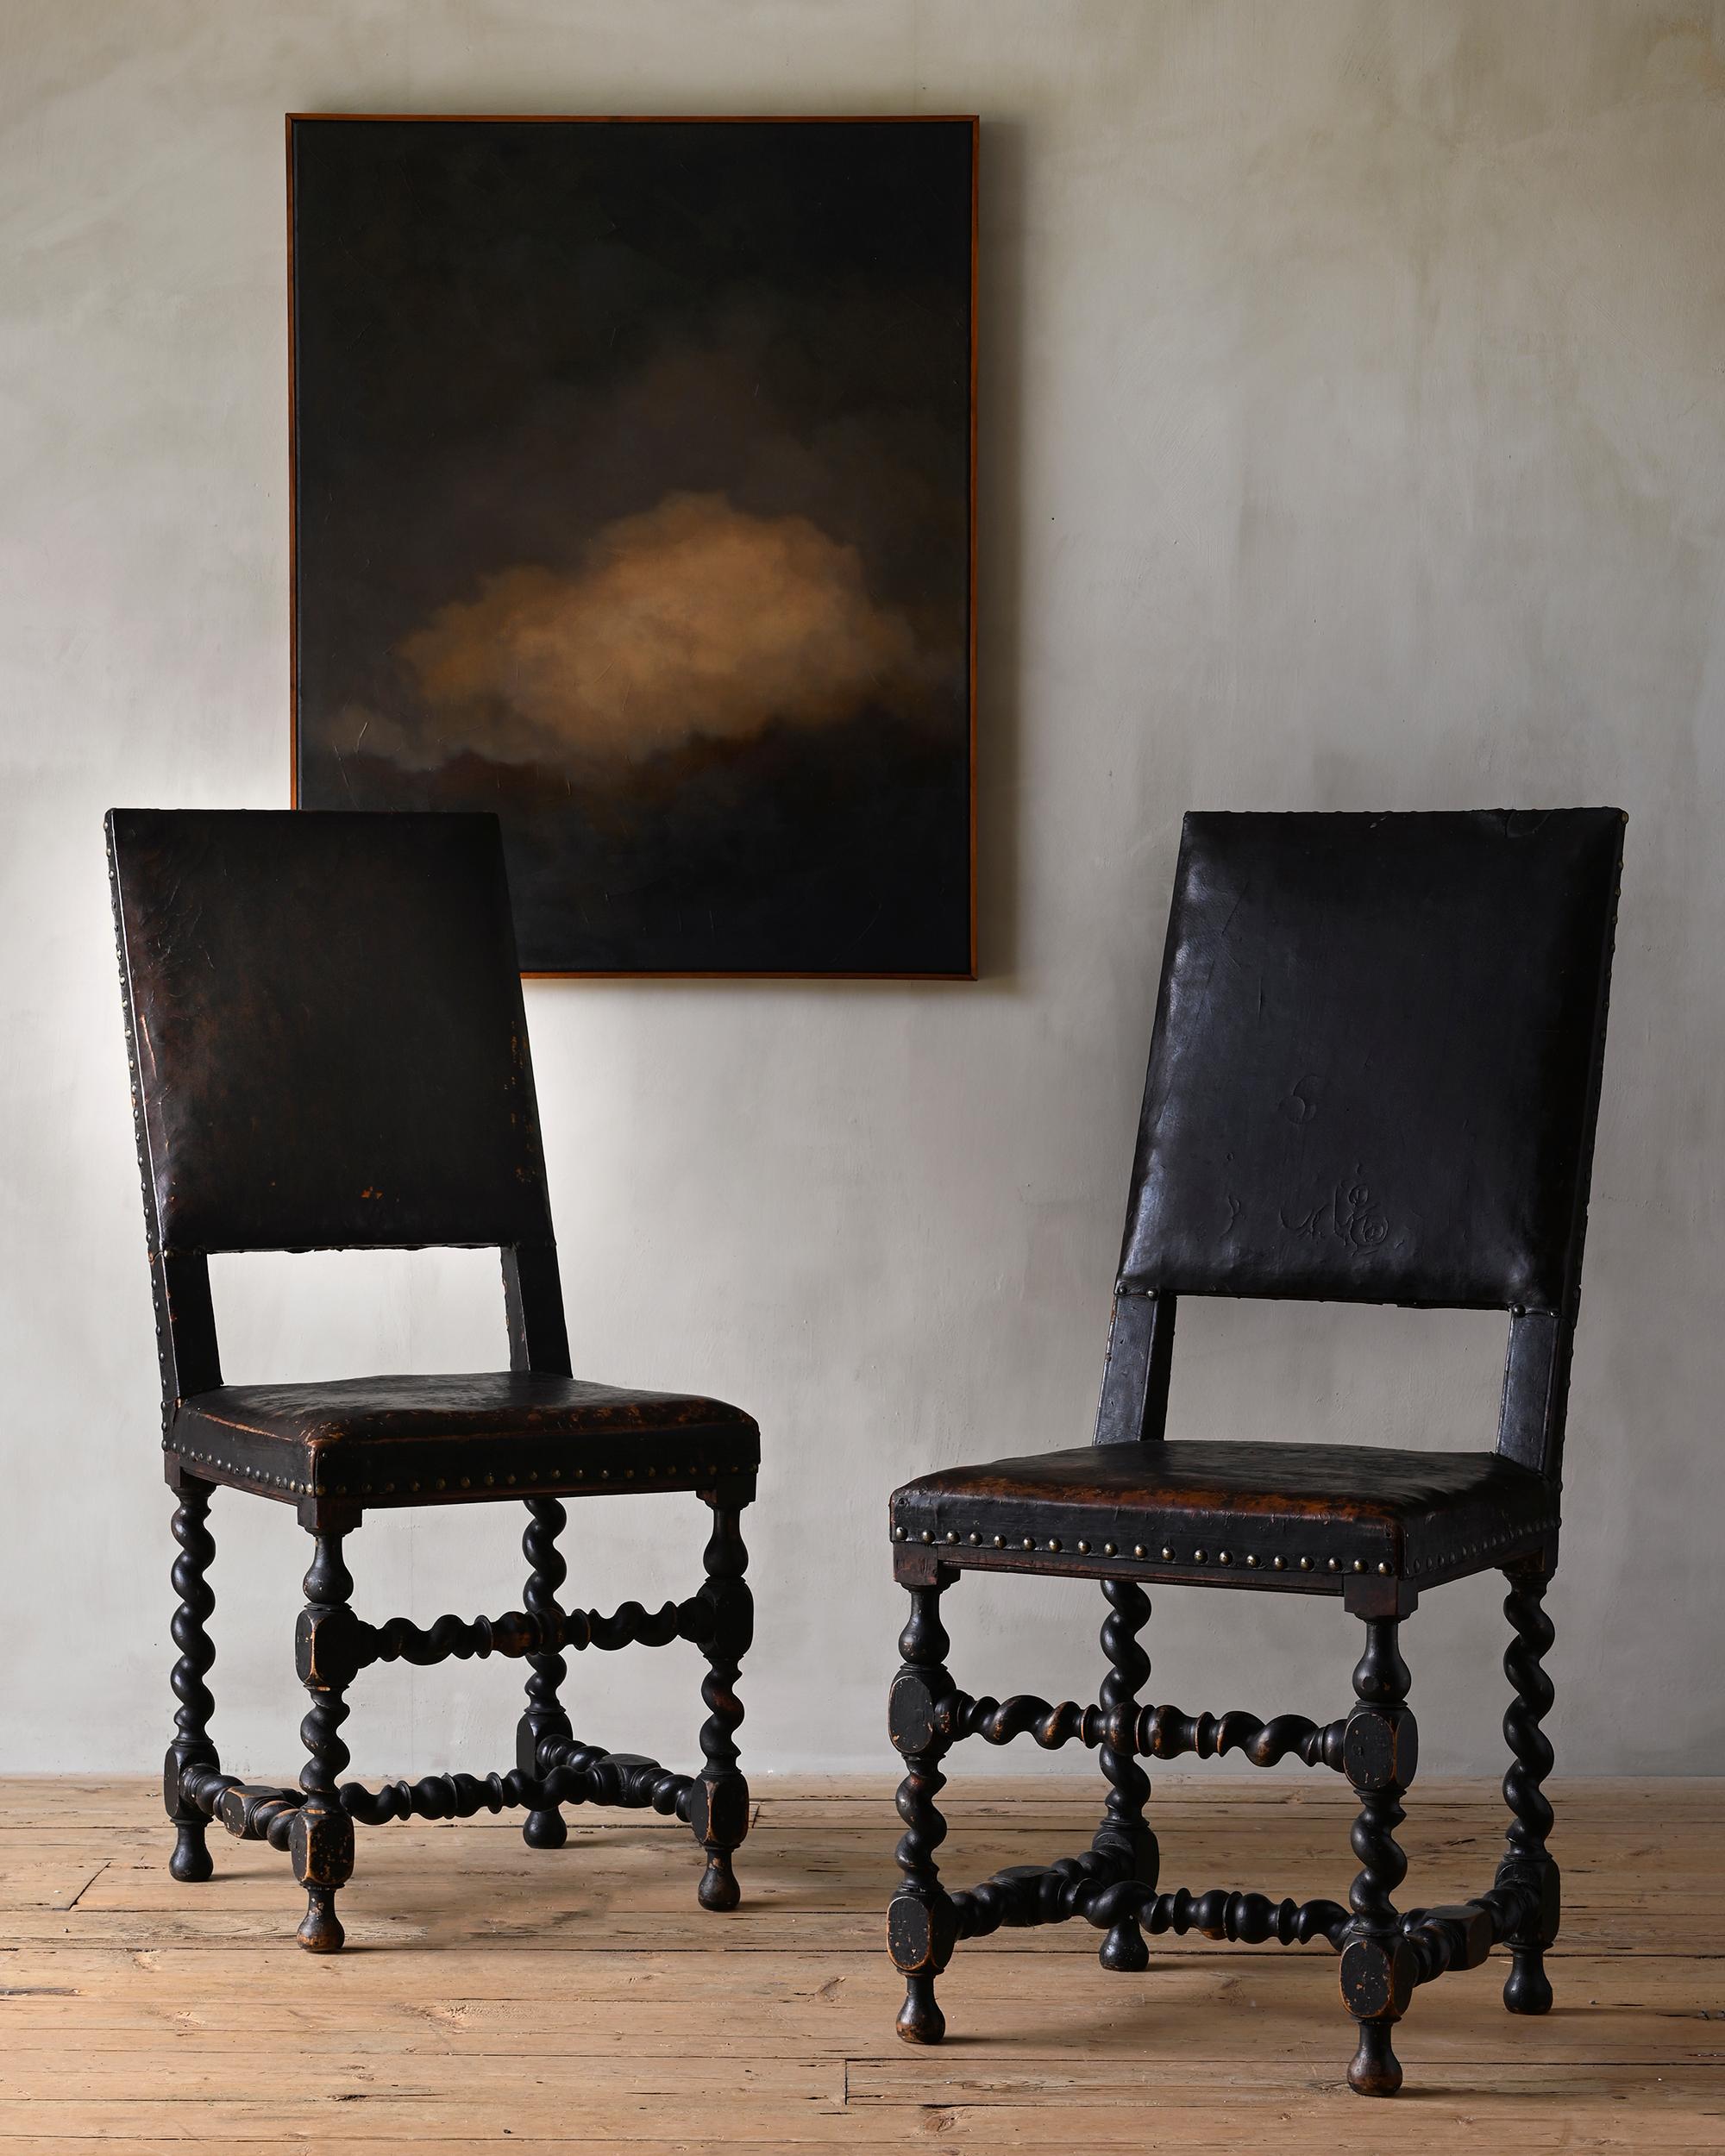 Fine and very rare pair of early 18th century Swedish Baroque chairs in their original finish, circa 1700 Sweden. Leather is original with some historical repairs.